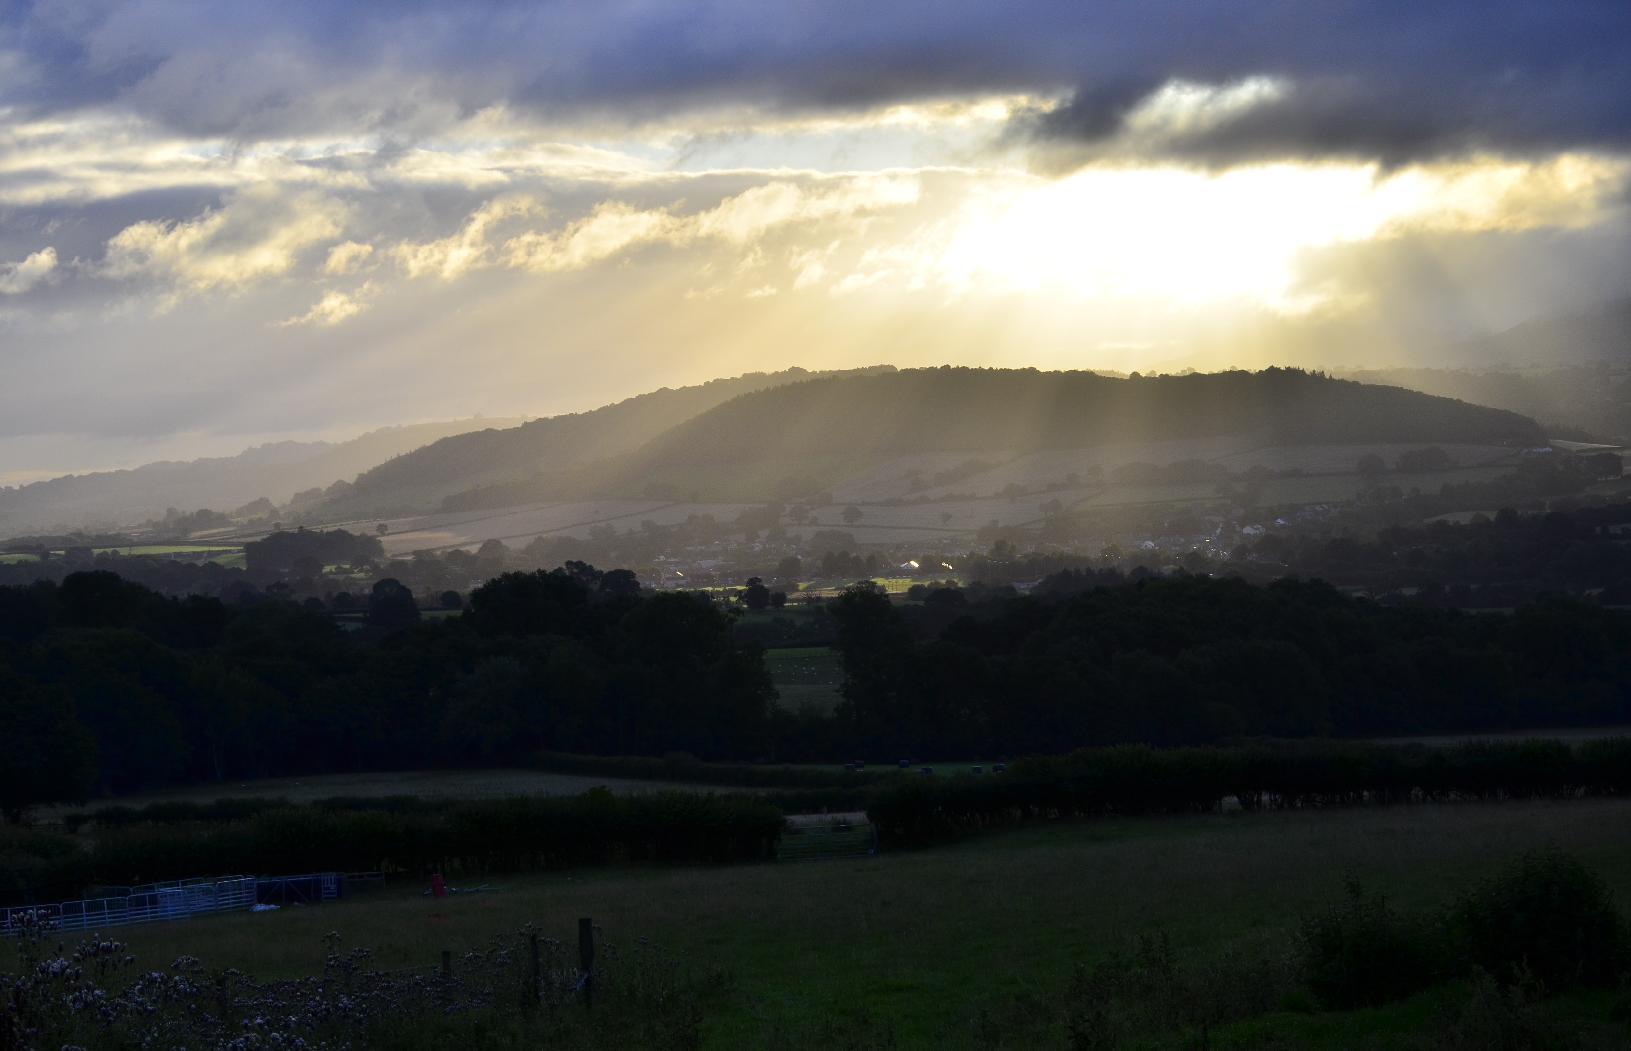 Rays shining through clouds onto a hilly landscape